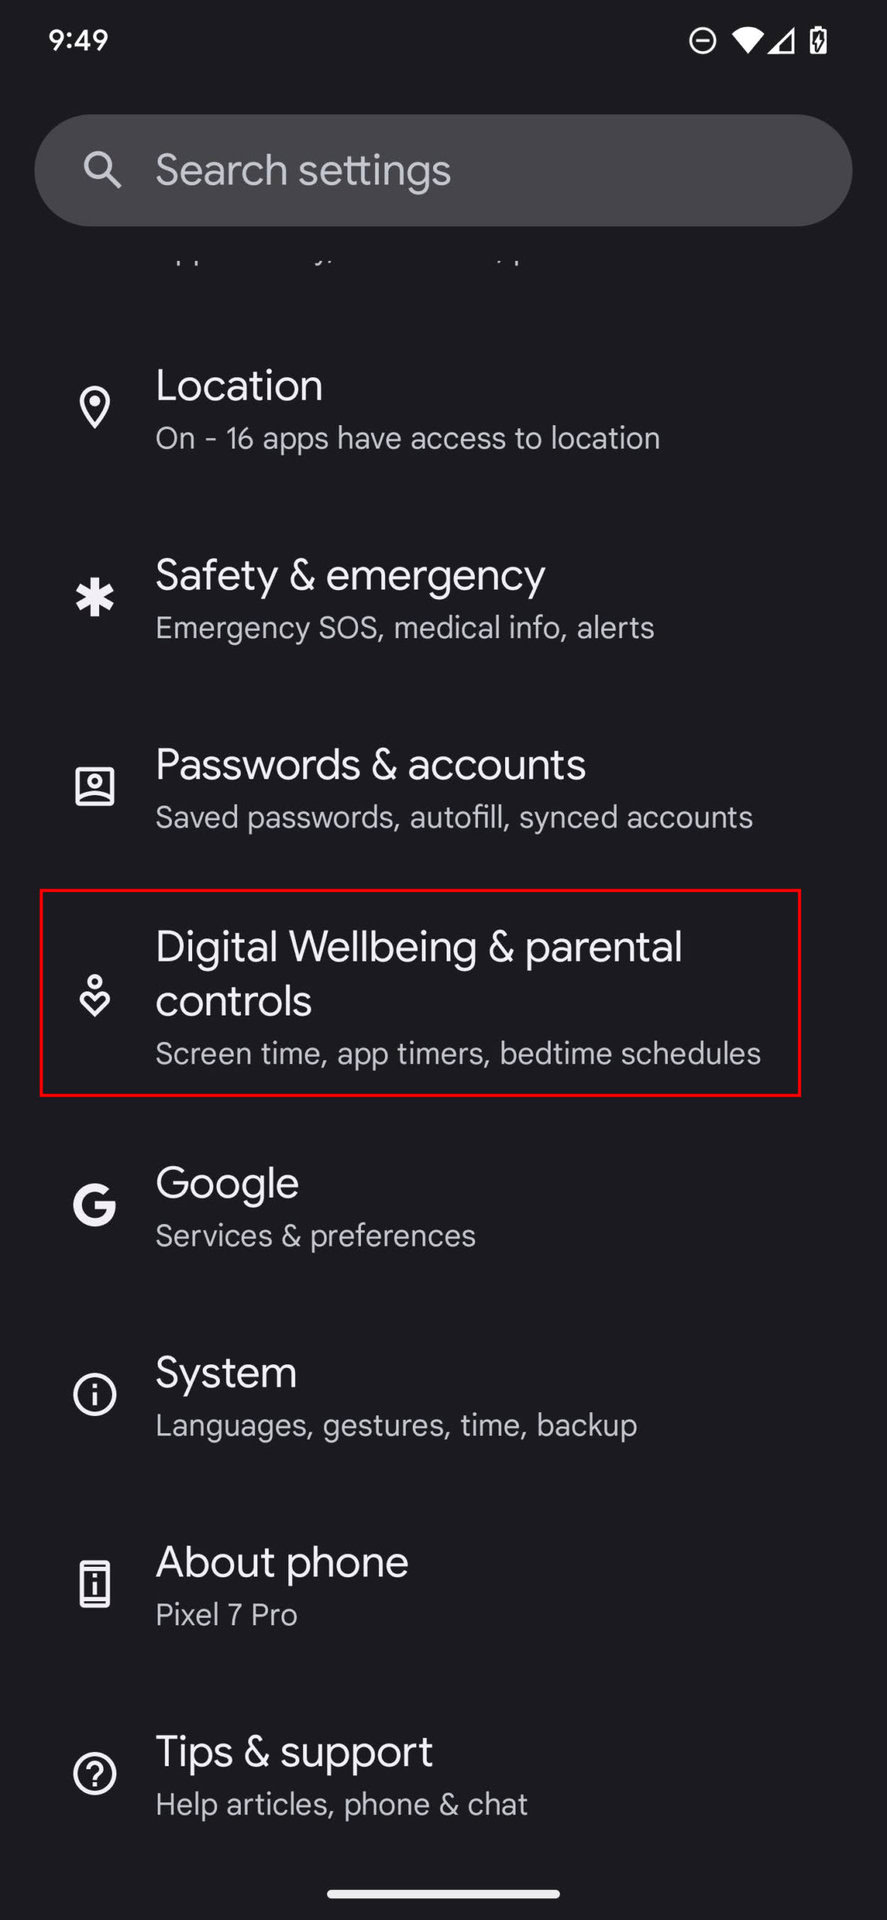 How to screen time on Android Android Authority